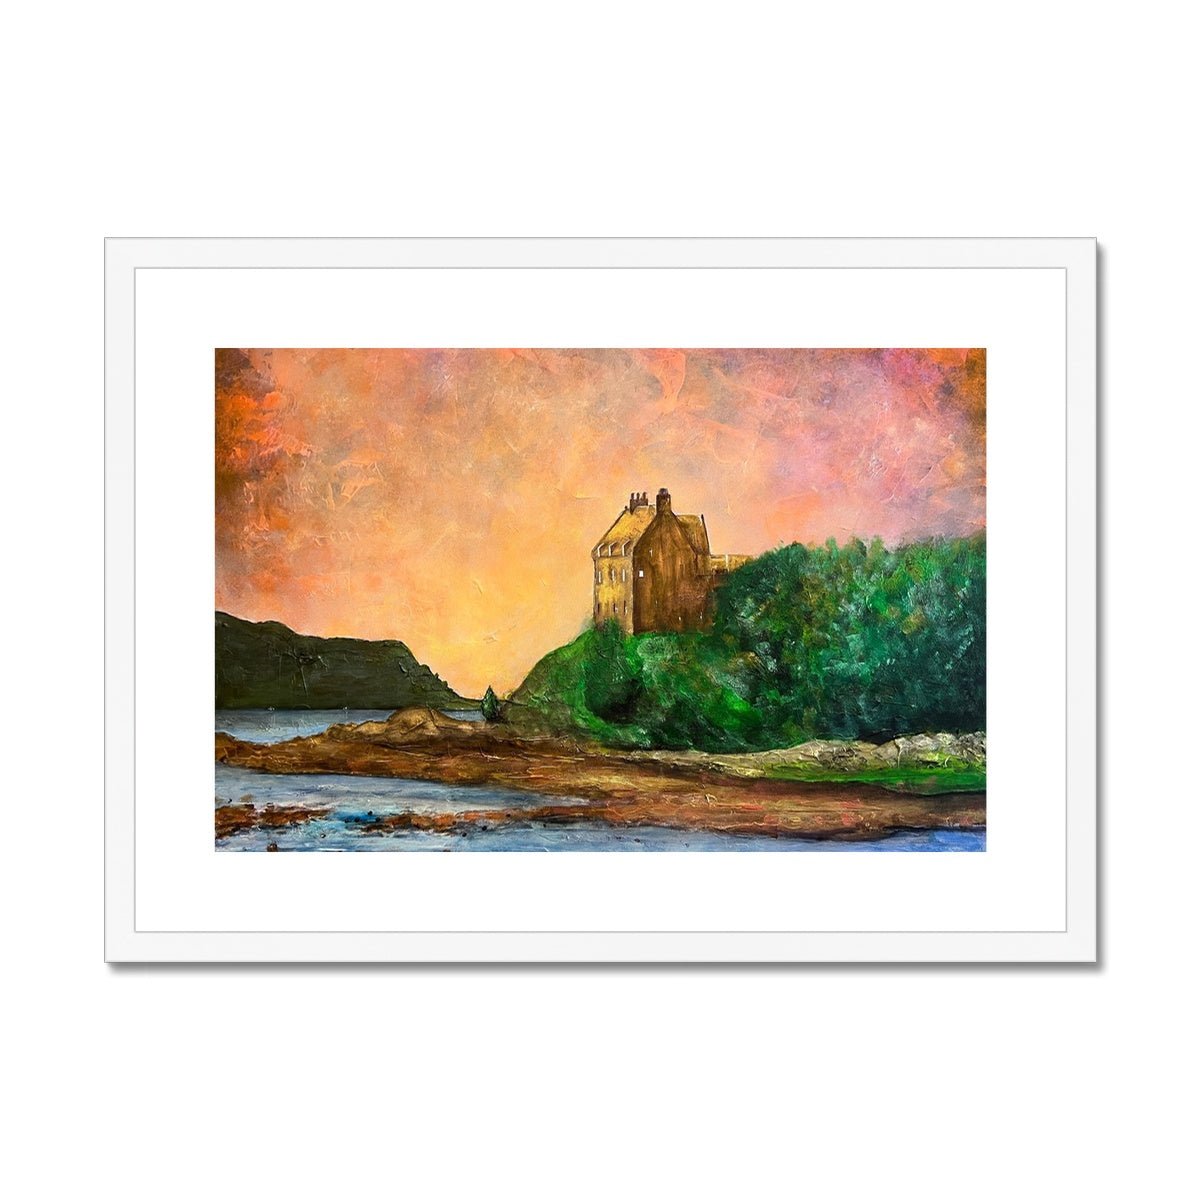 Duntrune Castle Painting | Framed & Mounted Prints From Scotland-Framed & Mounted Prints-Historic & Iconic Scotland Art Gallery-A2 Landscape-White Frame-Paintings, Prints, Homeware, Art Gifts From Scotland By Scottish Artist Kevin Hunter